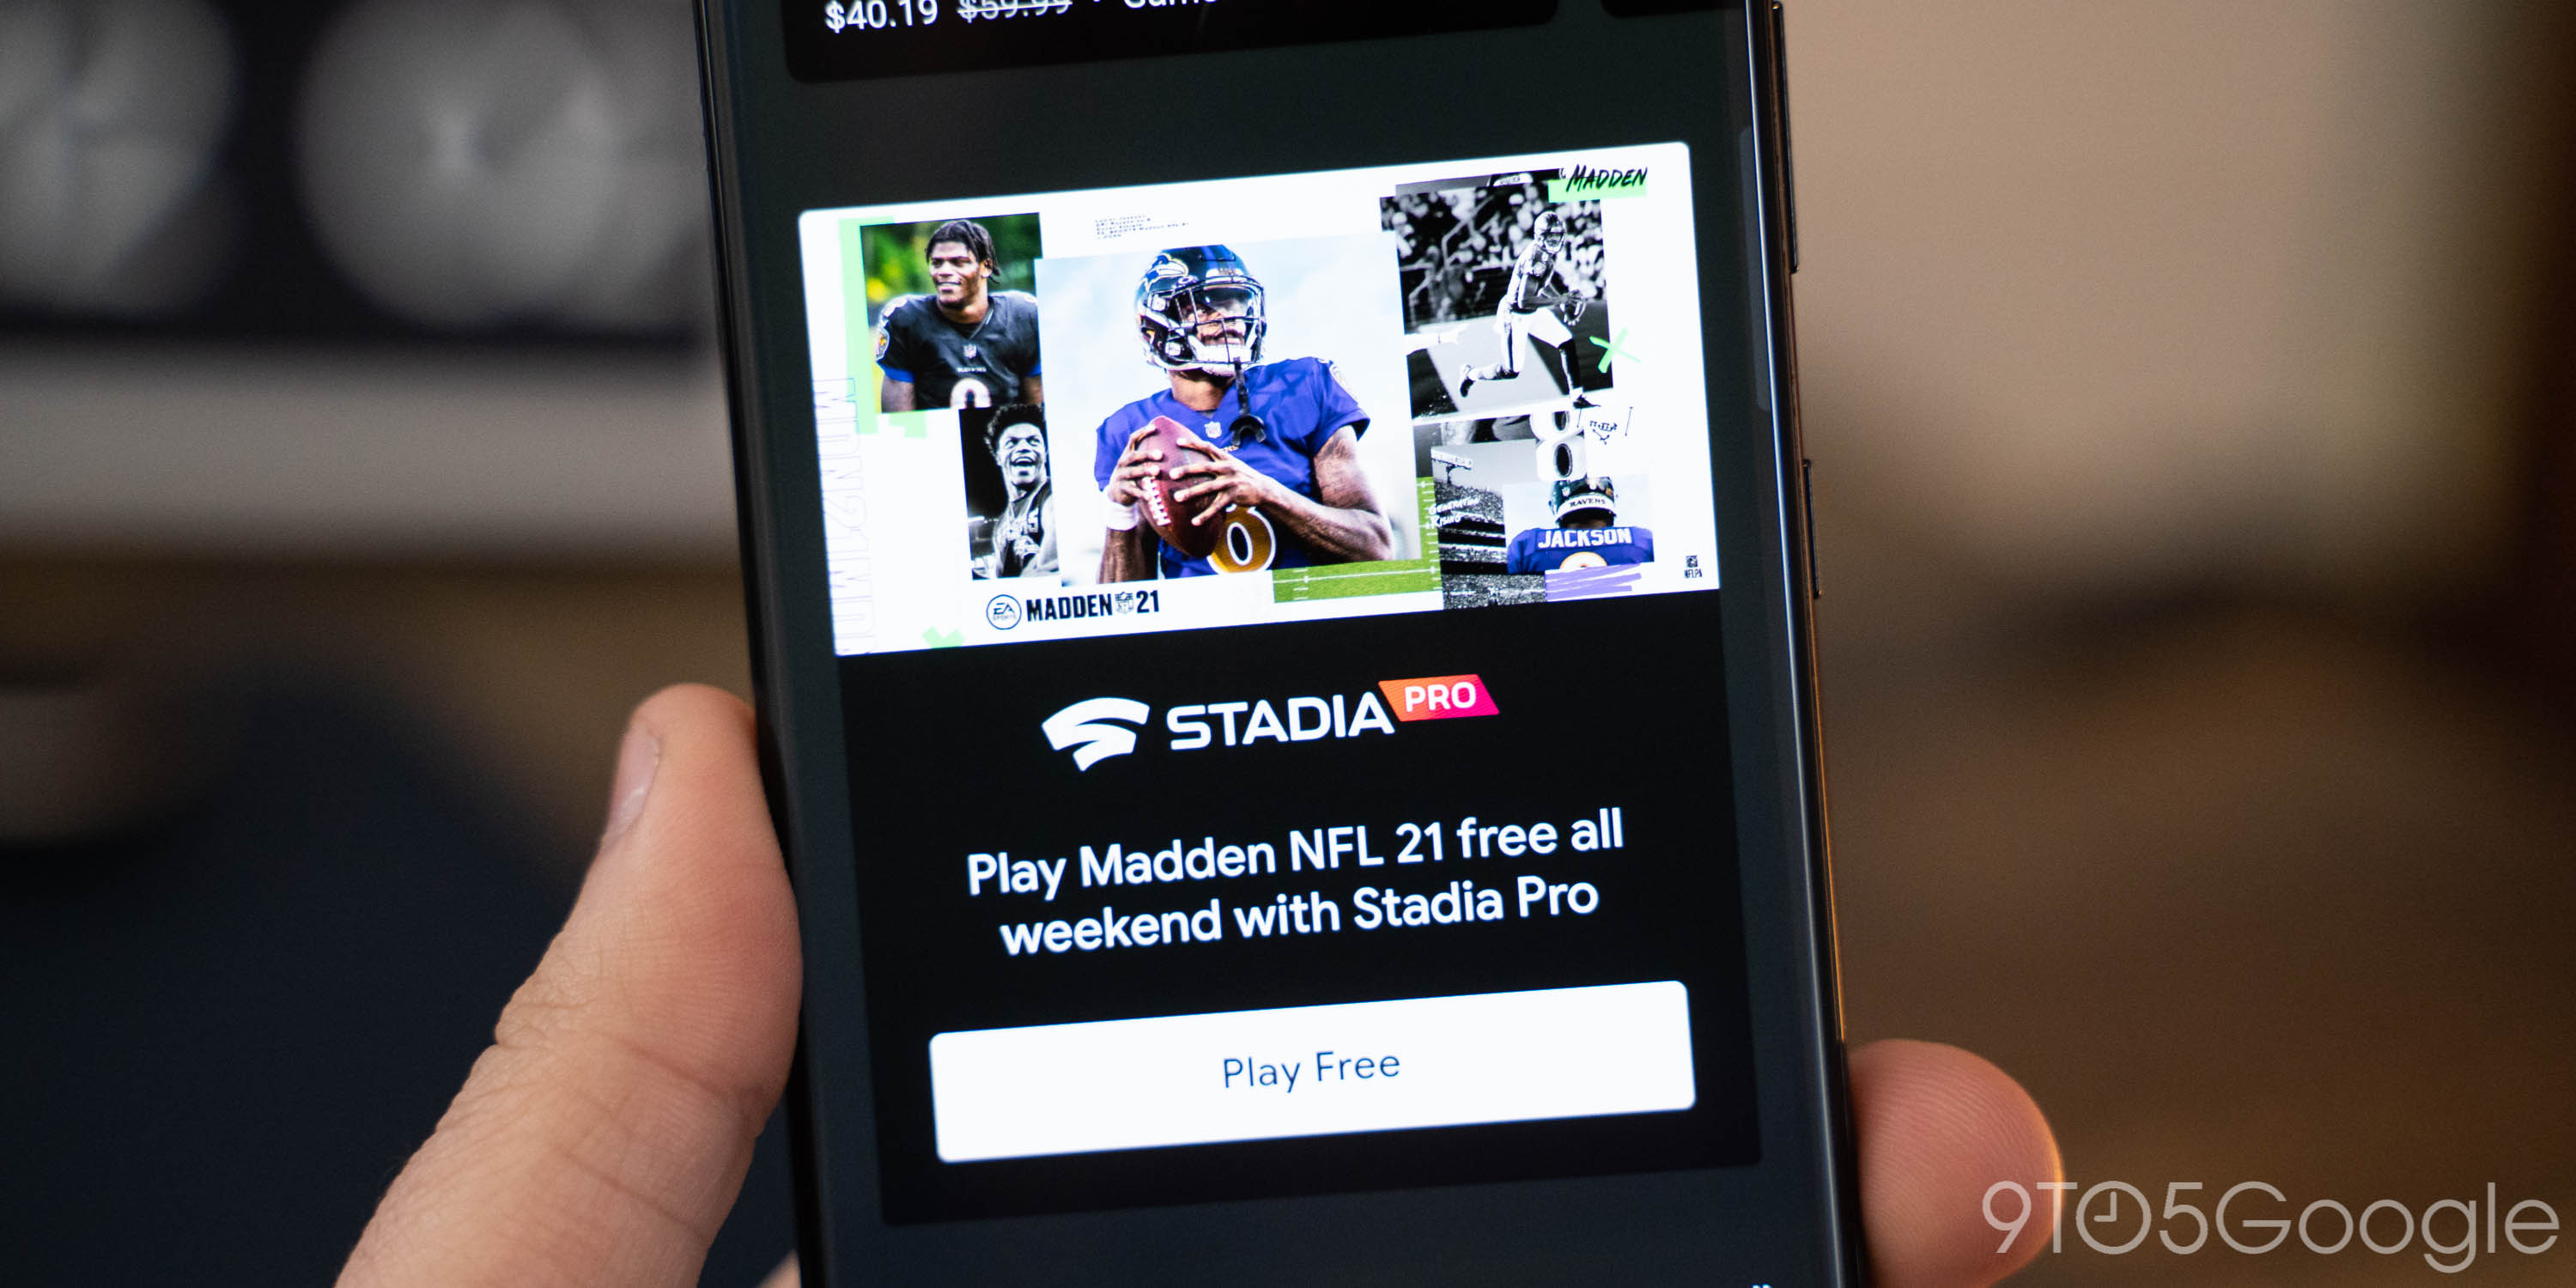 Madden NFL 21 is now available on Google Stadia